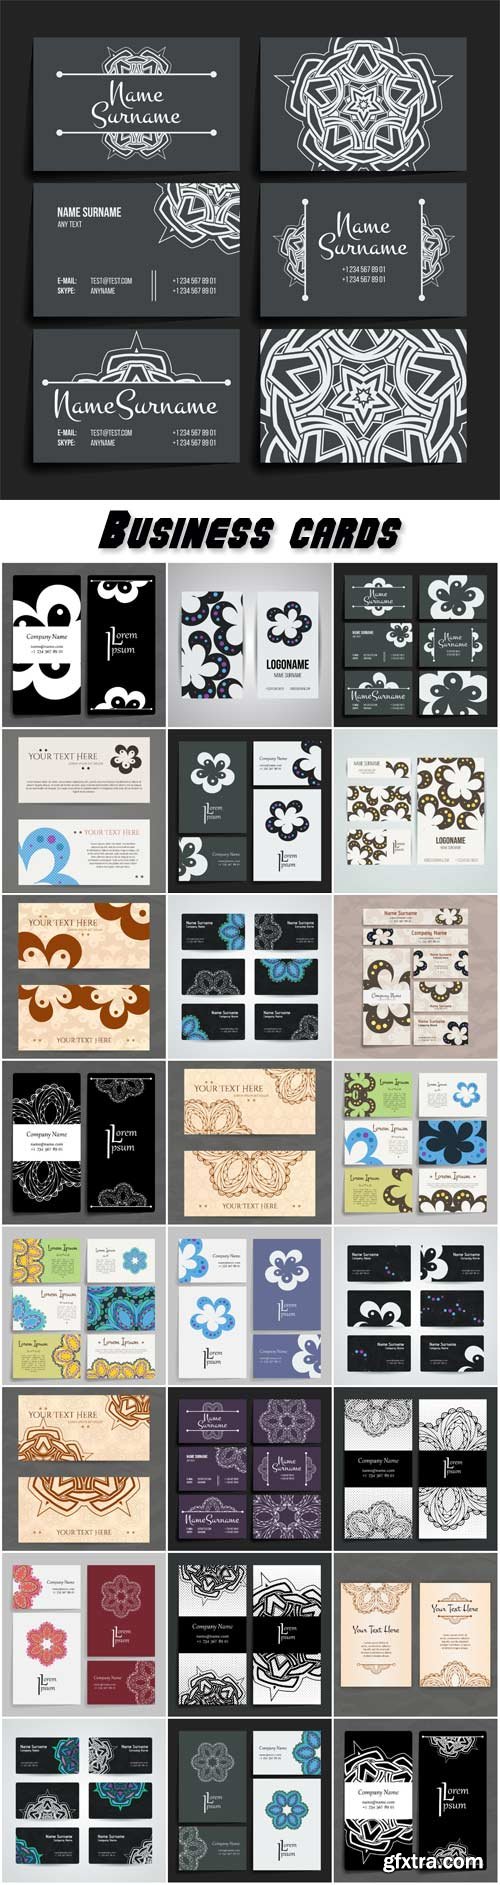 Business cards vector, arabian patterns